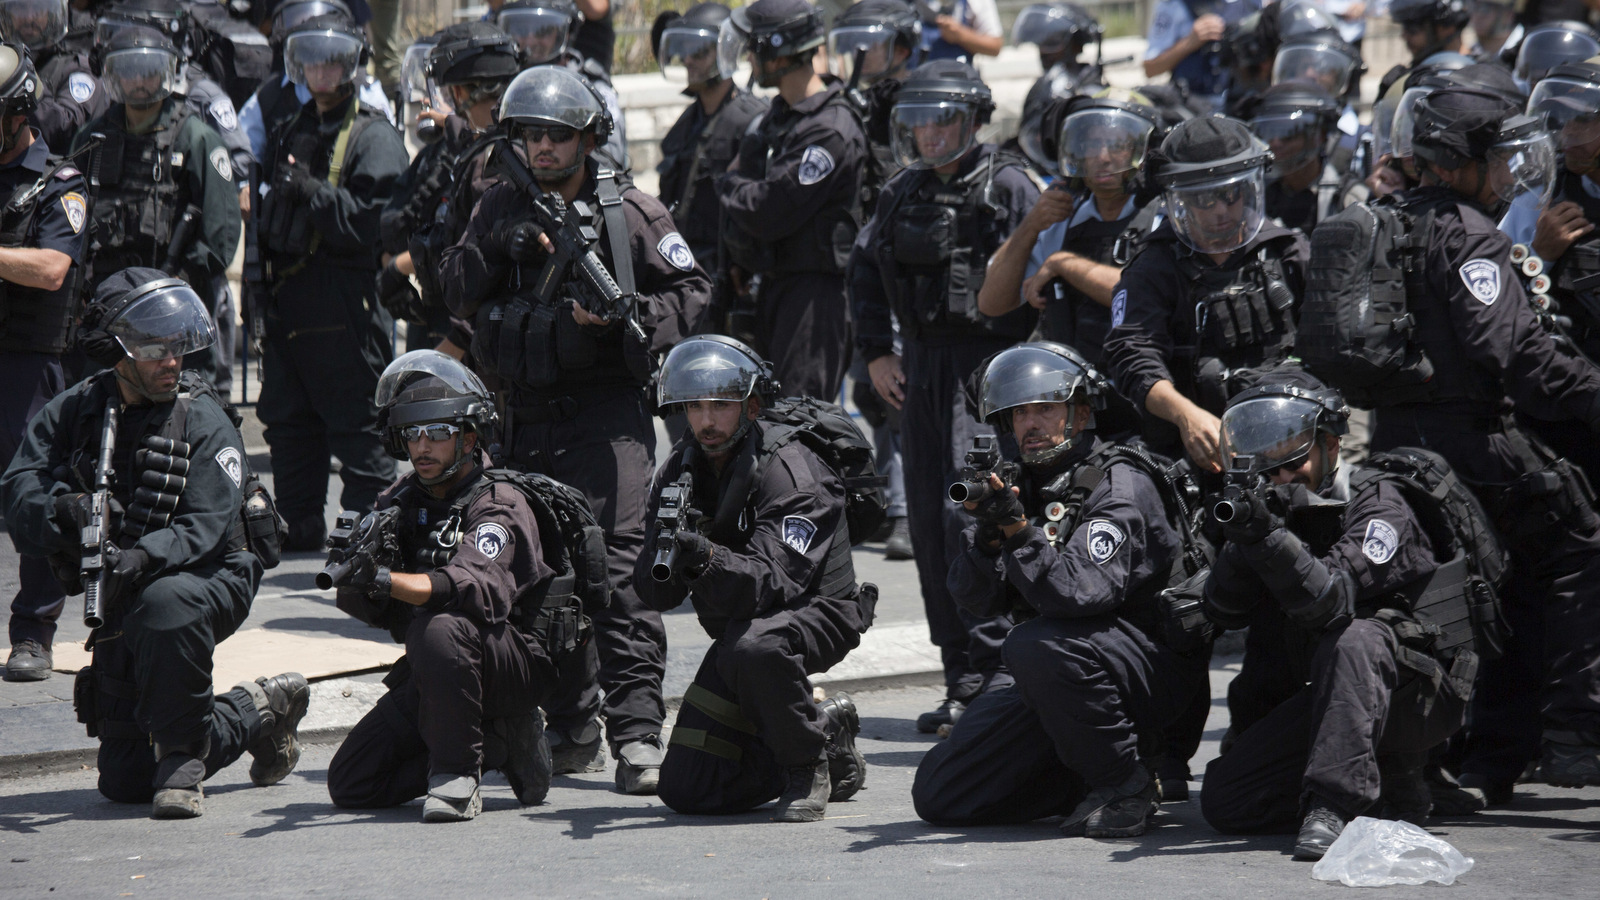 Israeli riot police aim their rifles at protesters outside of Jerusalem's Old City, July 28, 2017. (AP/Ariel Schalit)